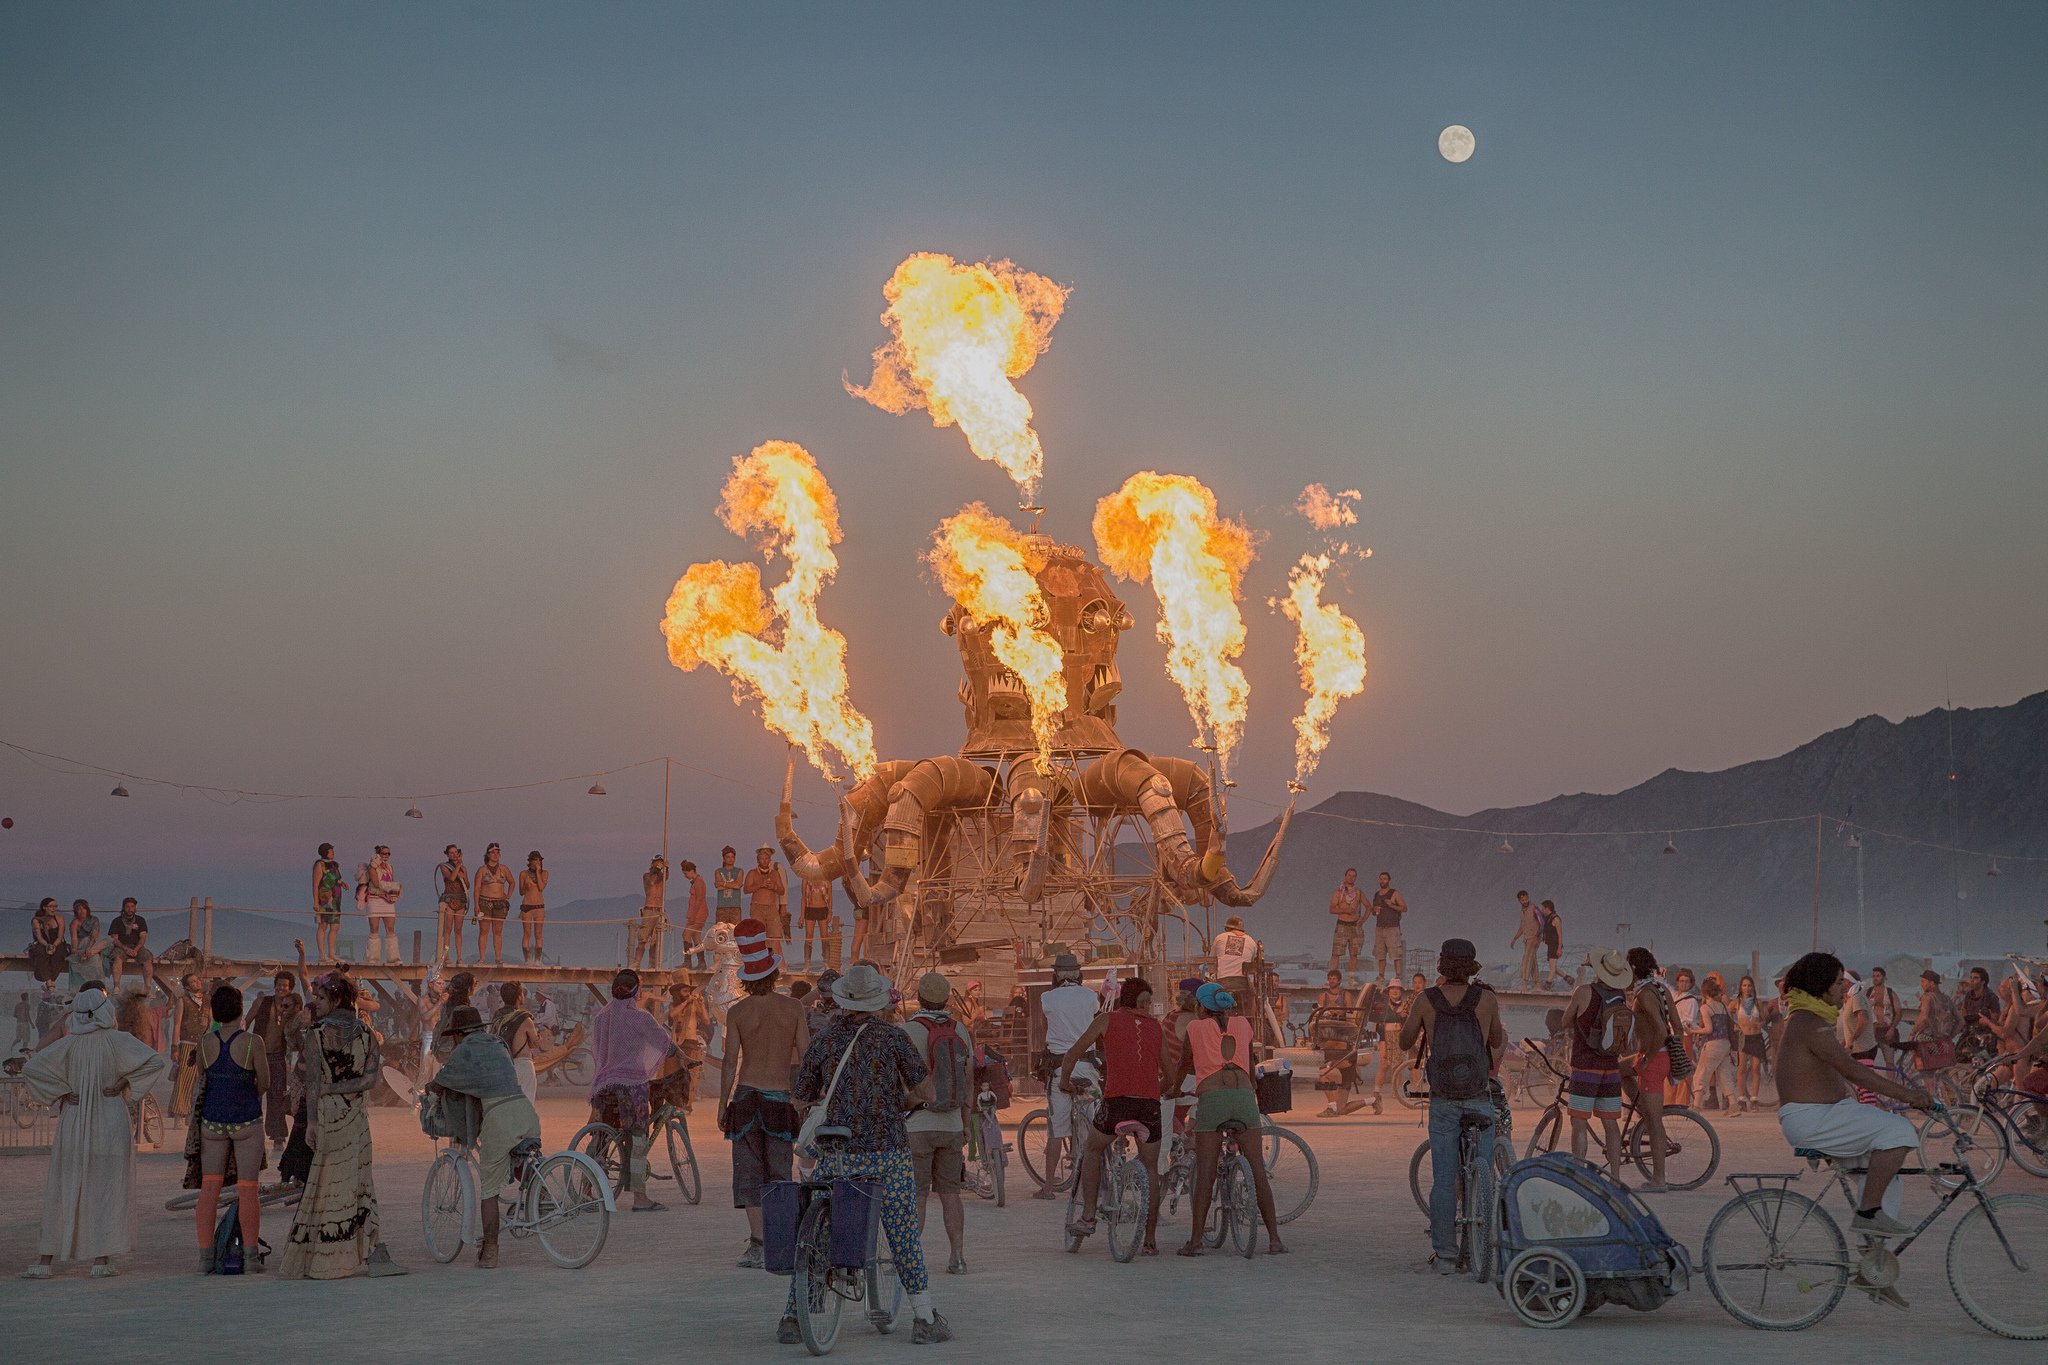 The History of the Burning Man Festival is an intriguing one